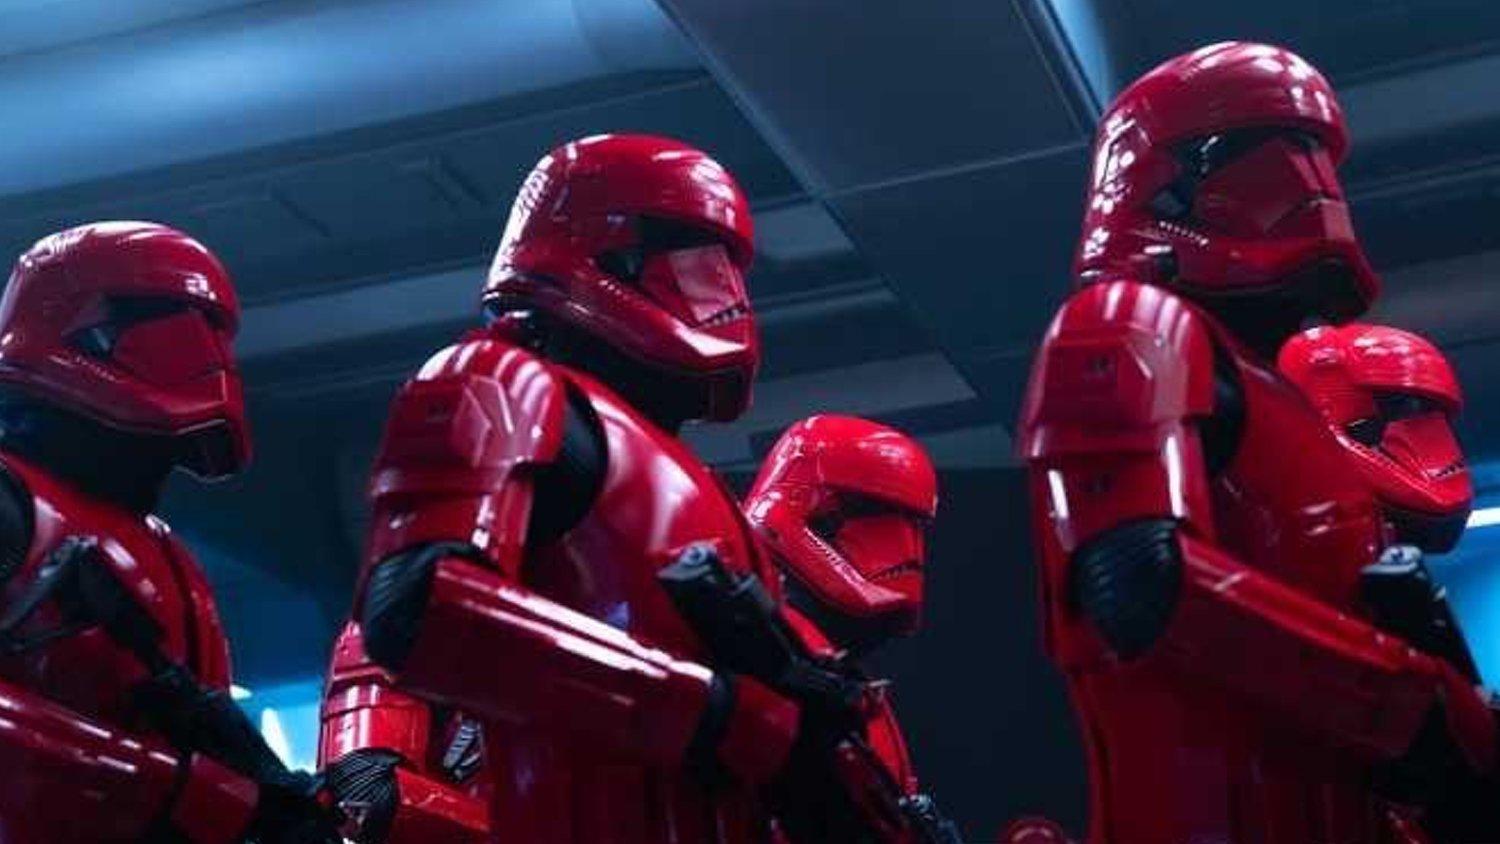 Here's Our First Look at The Sith Trooper From STAR WARS